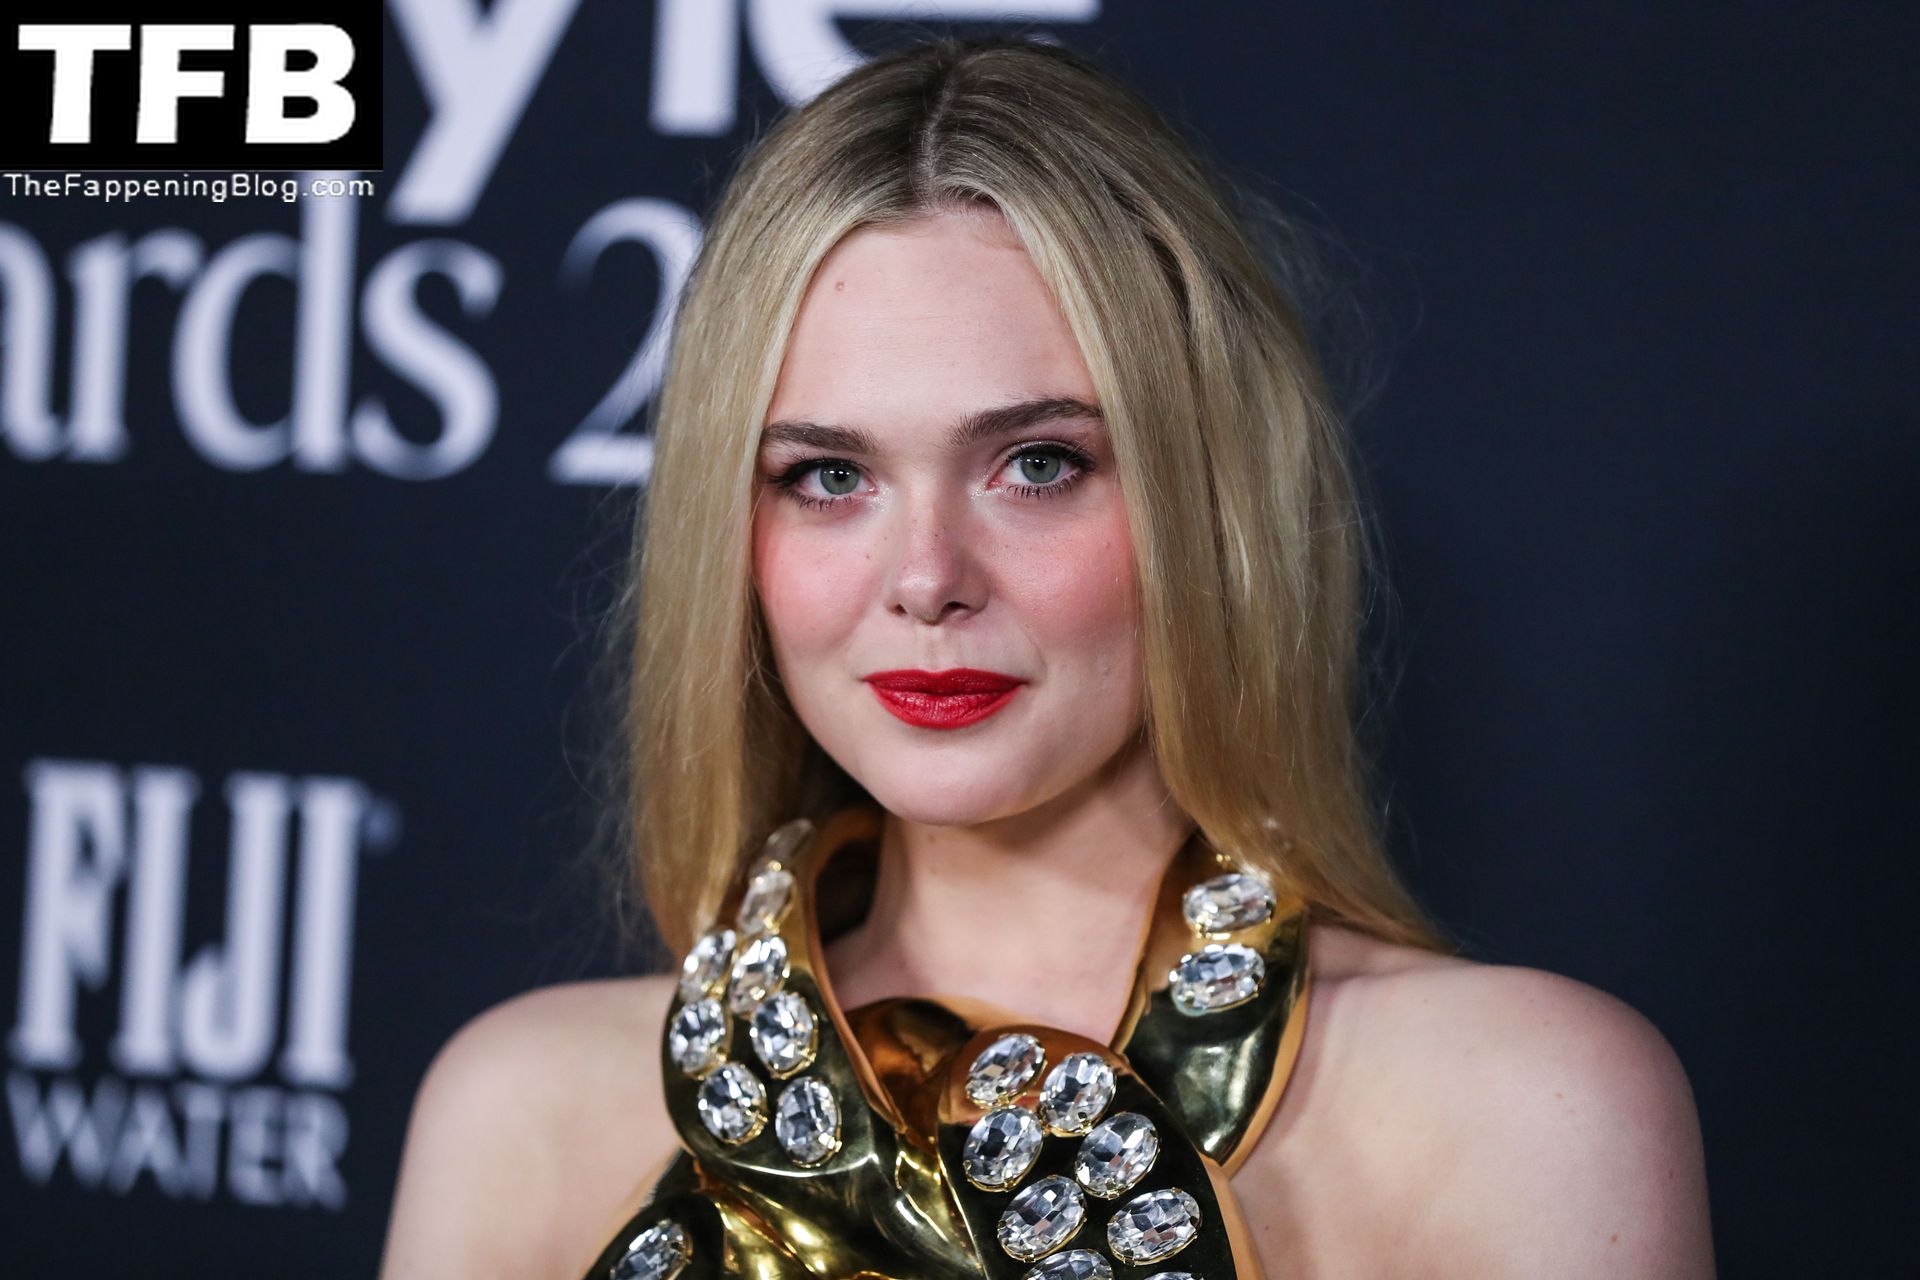 Elle-Fanning-Sexy-Braless-The-Fappening-Blog-11.jpg